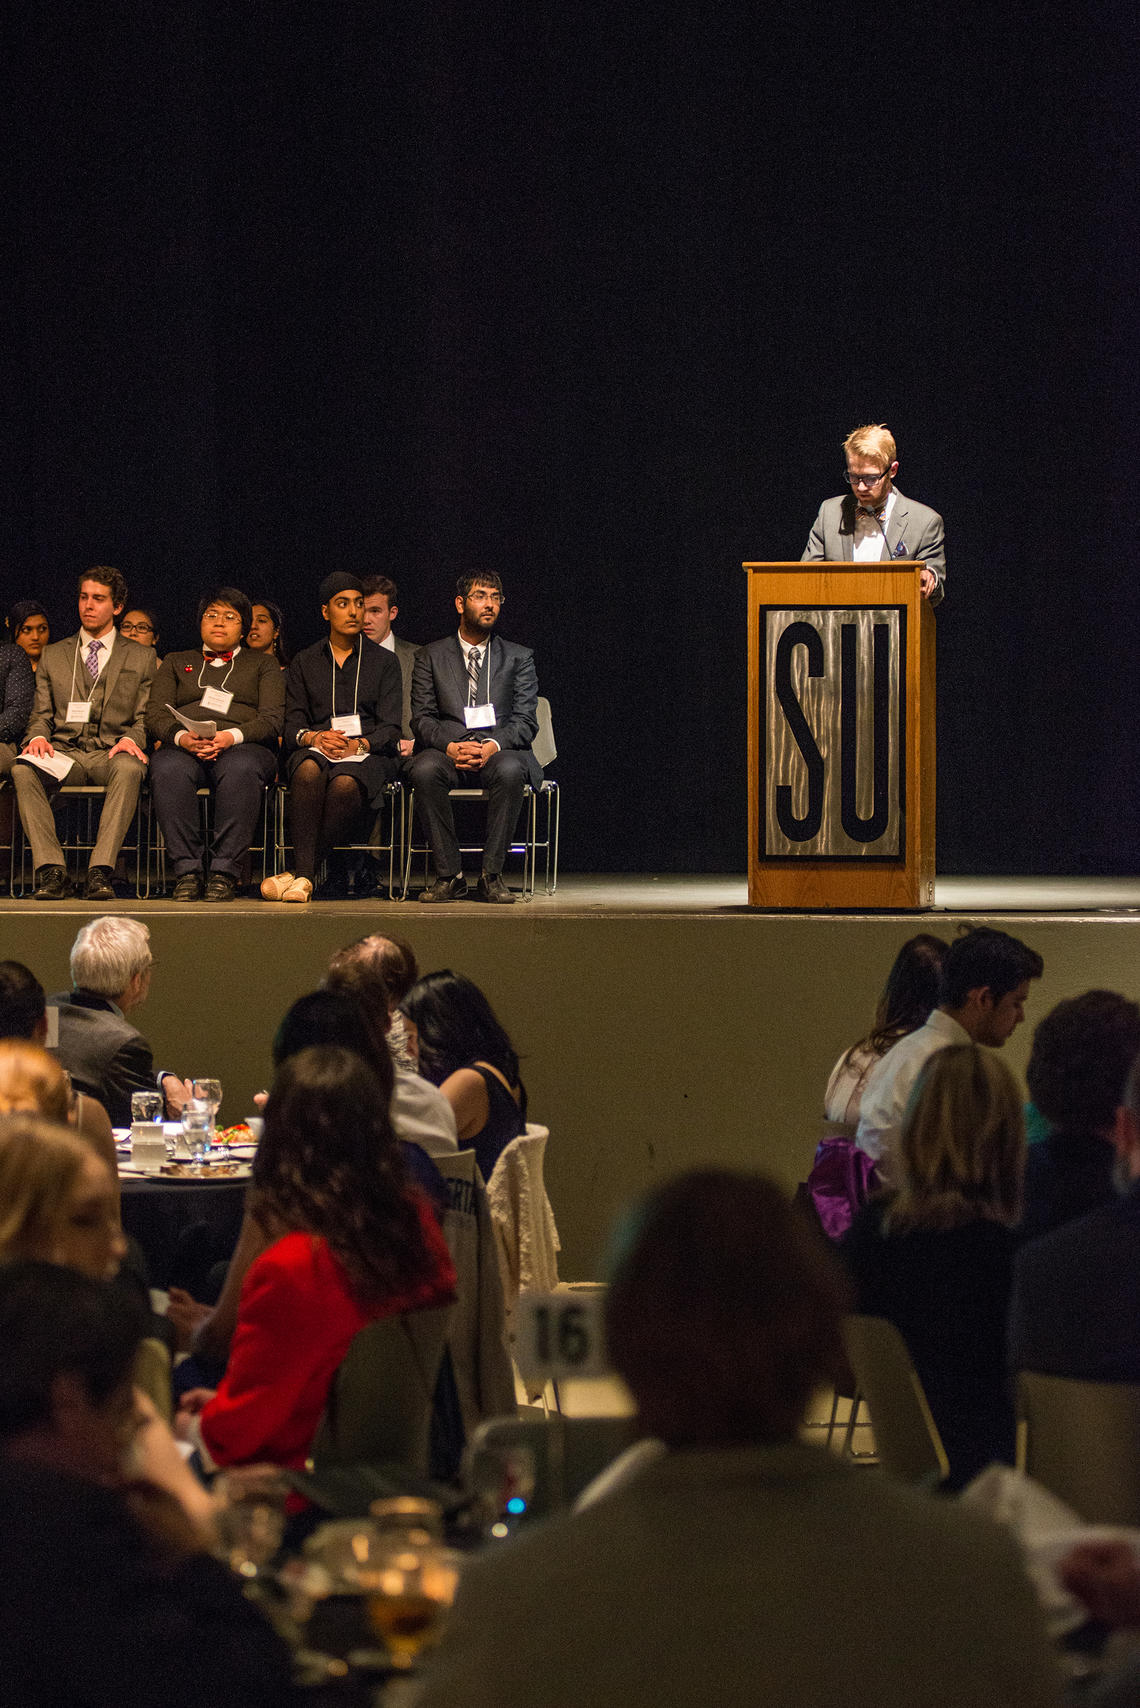 The SU Teaching Excellence Awards recognize excellence in teaching, and are decided entirely by students. 